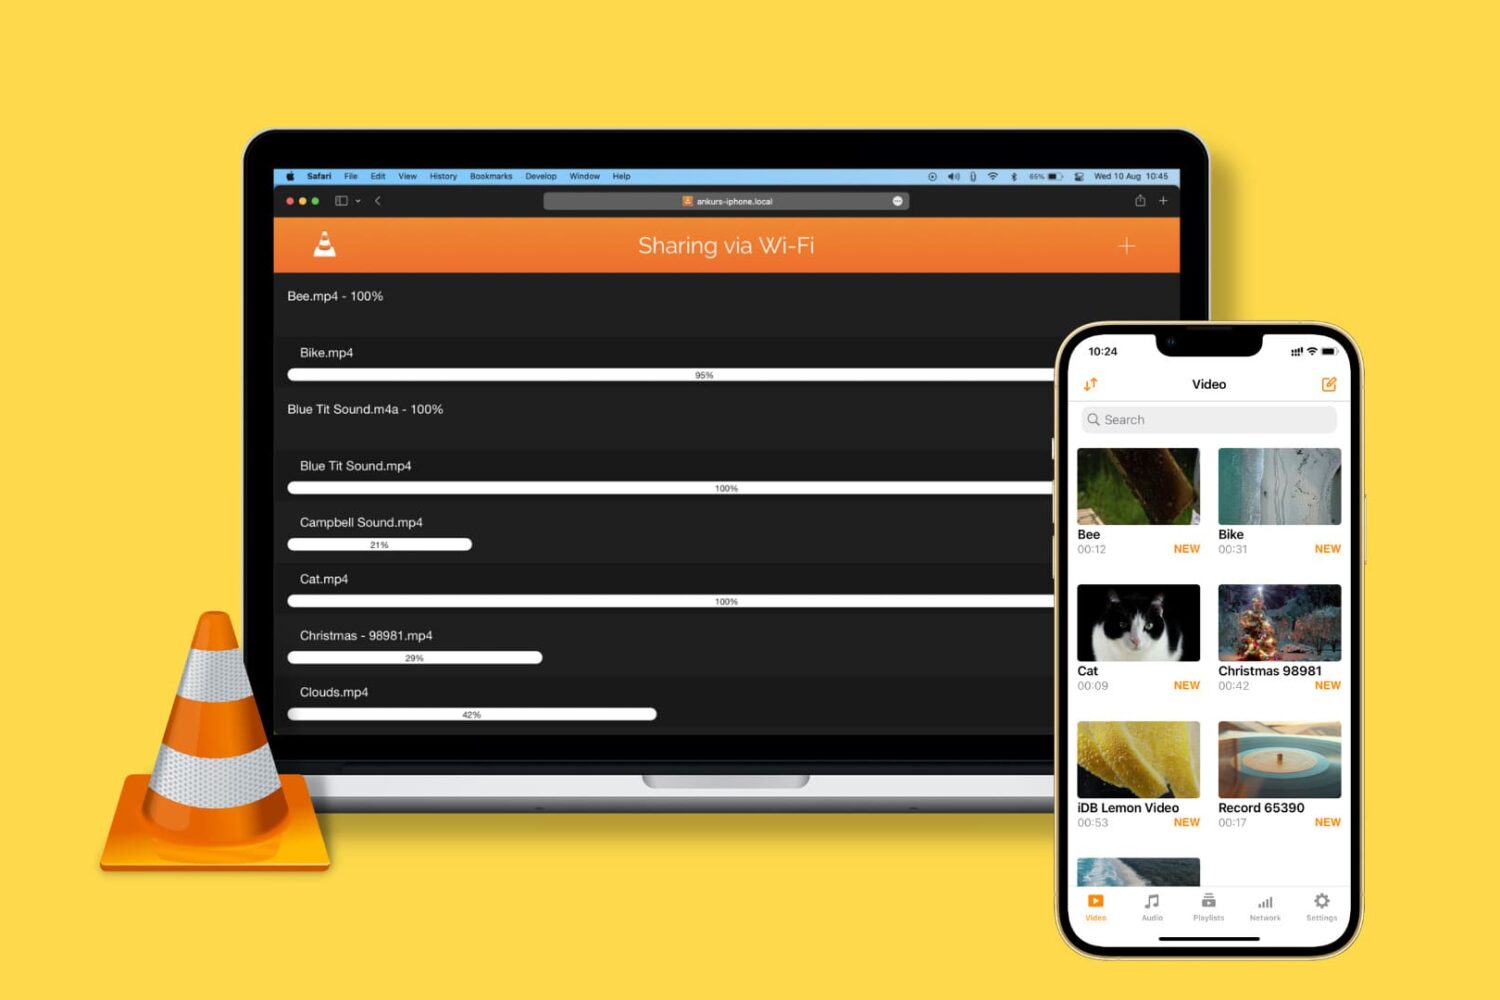 Transfer file to the VLC iPhone or iPad app from your Mac or PC